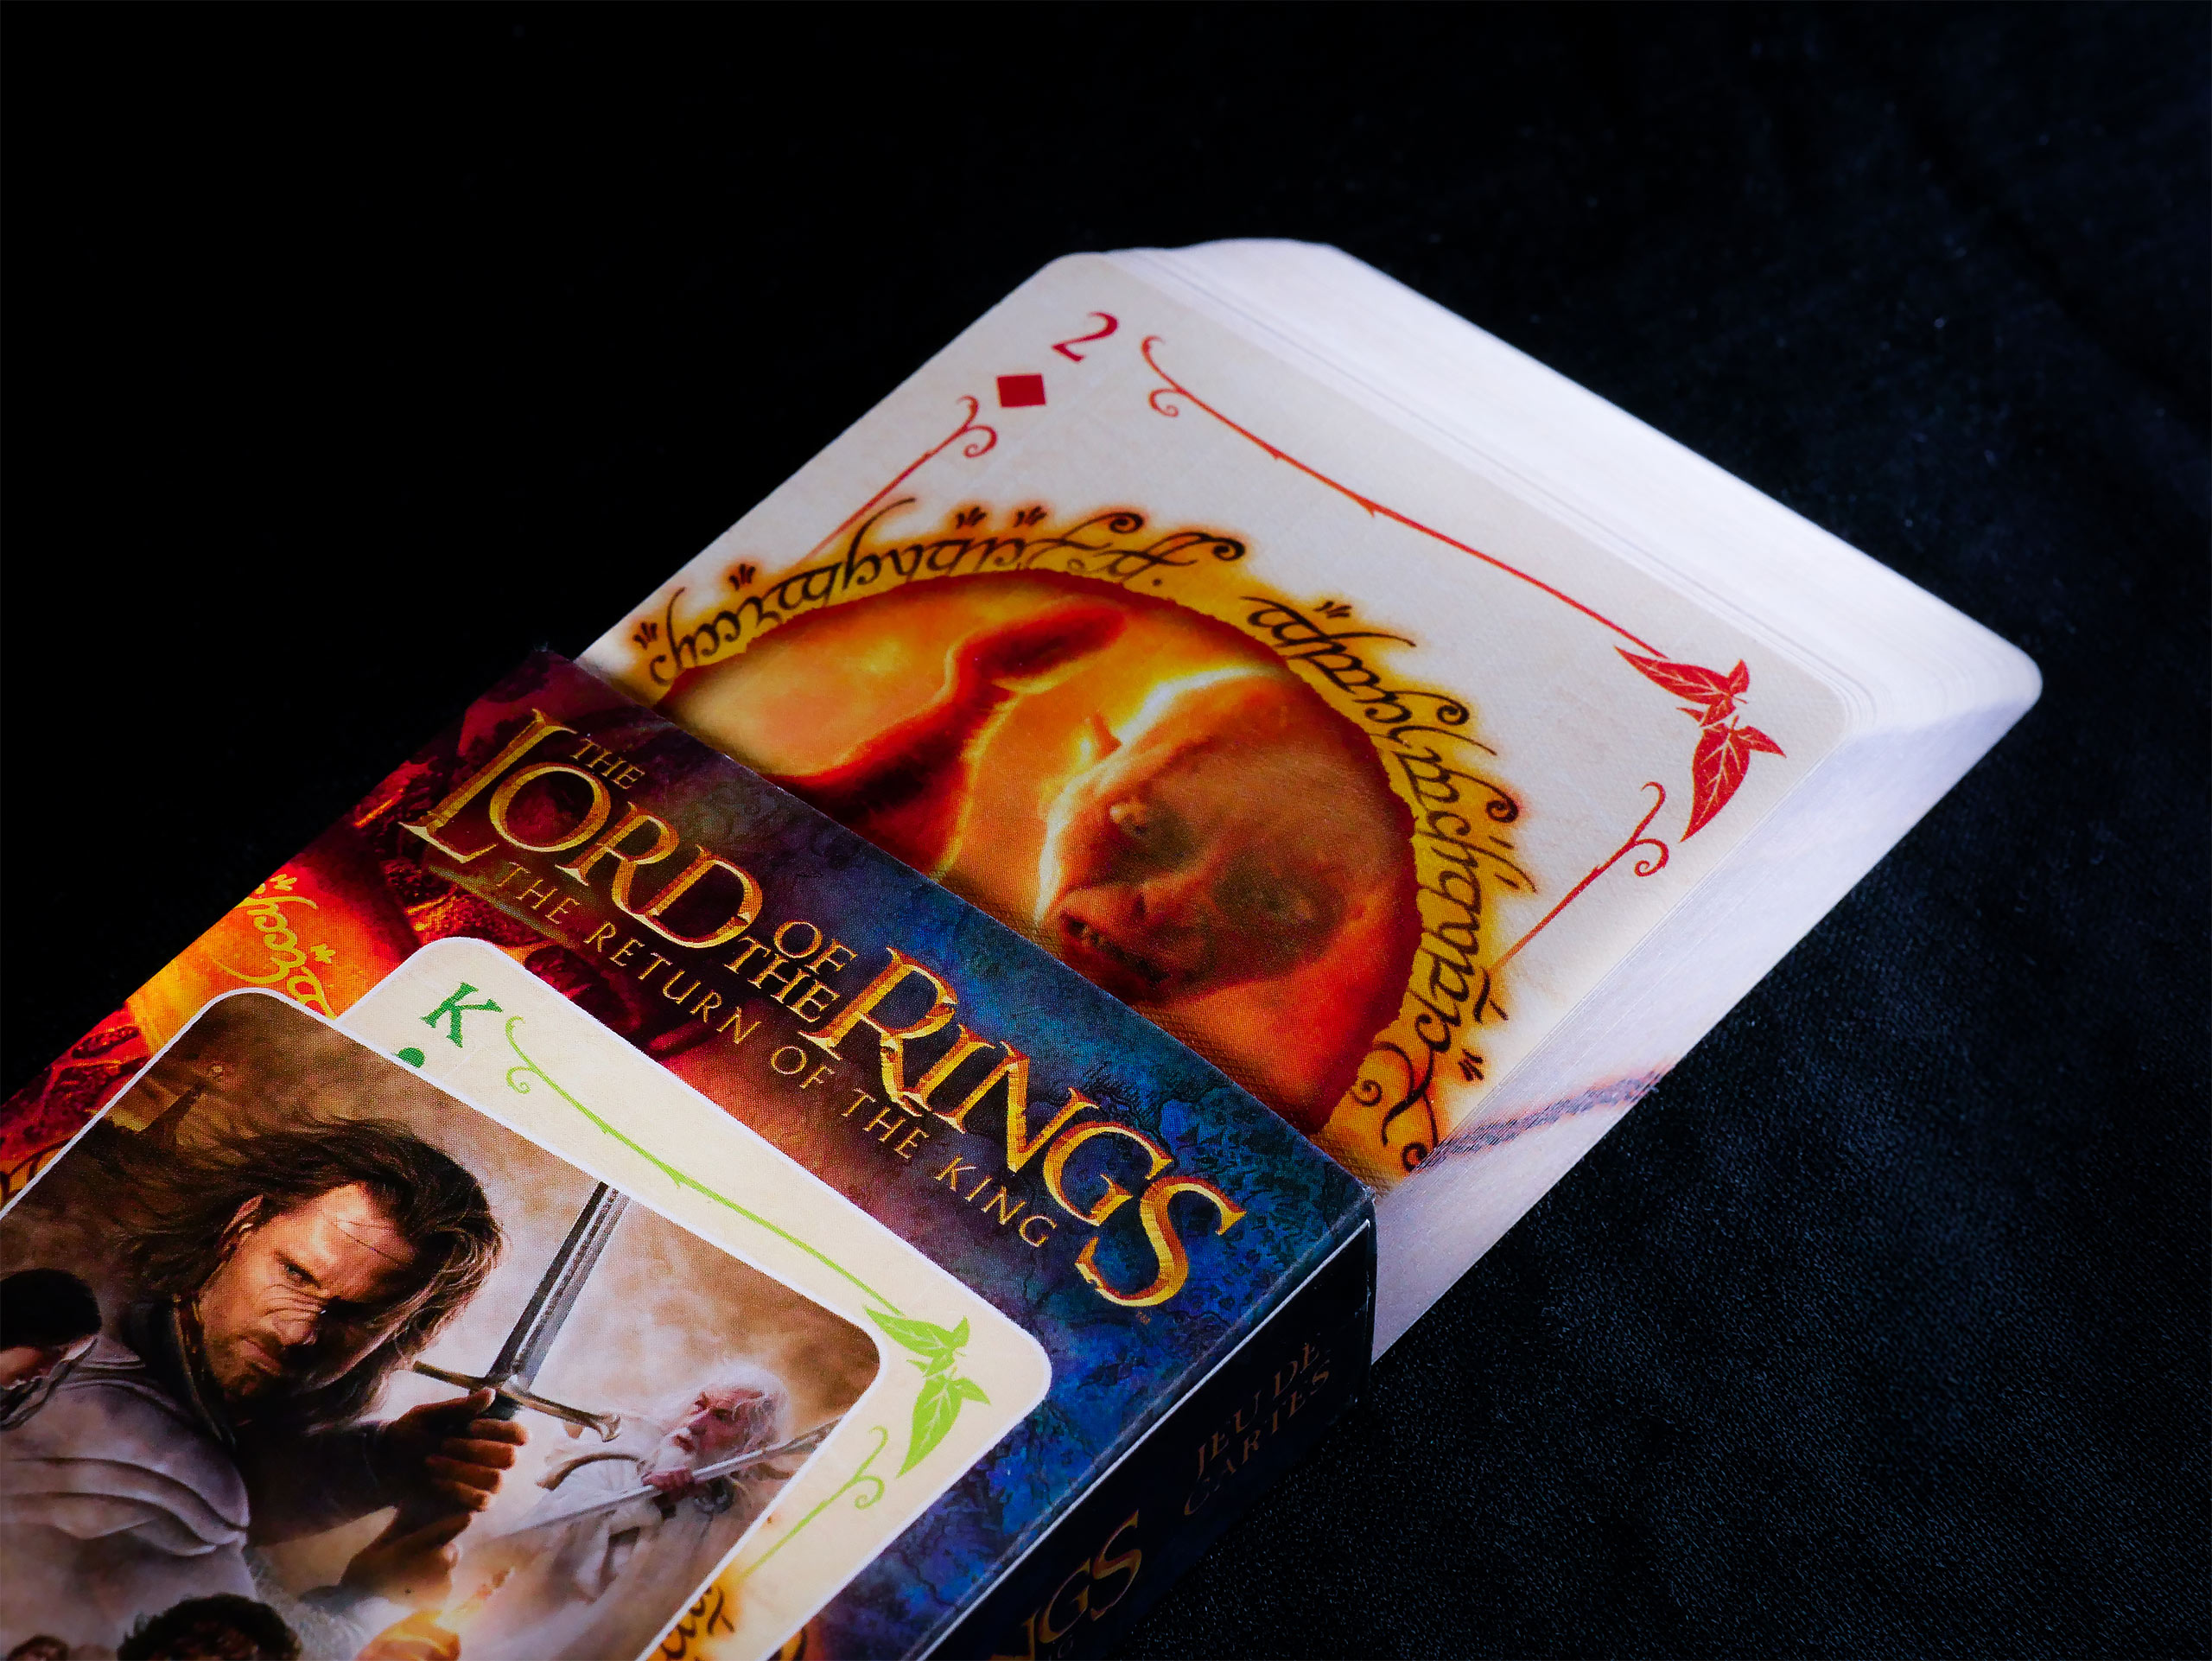 Lord of the Rings - The Return of the King playing cards